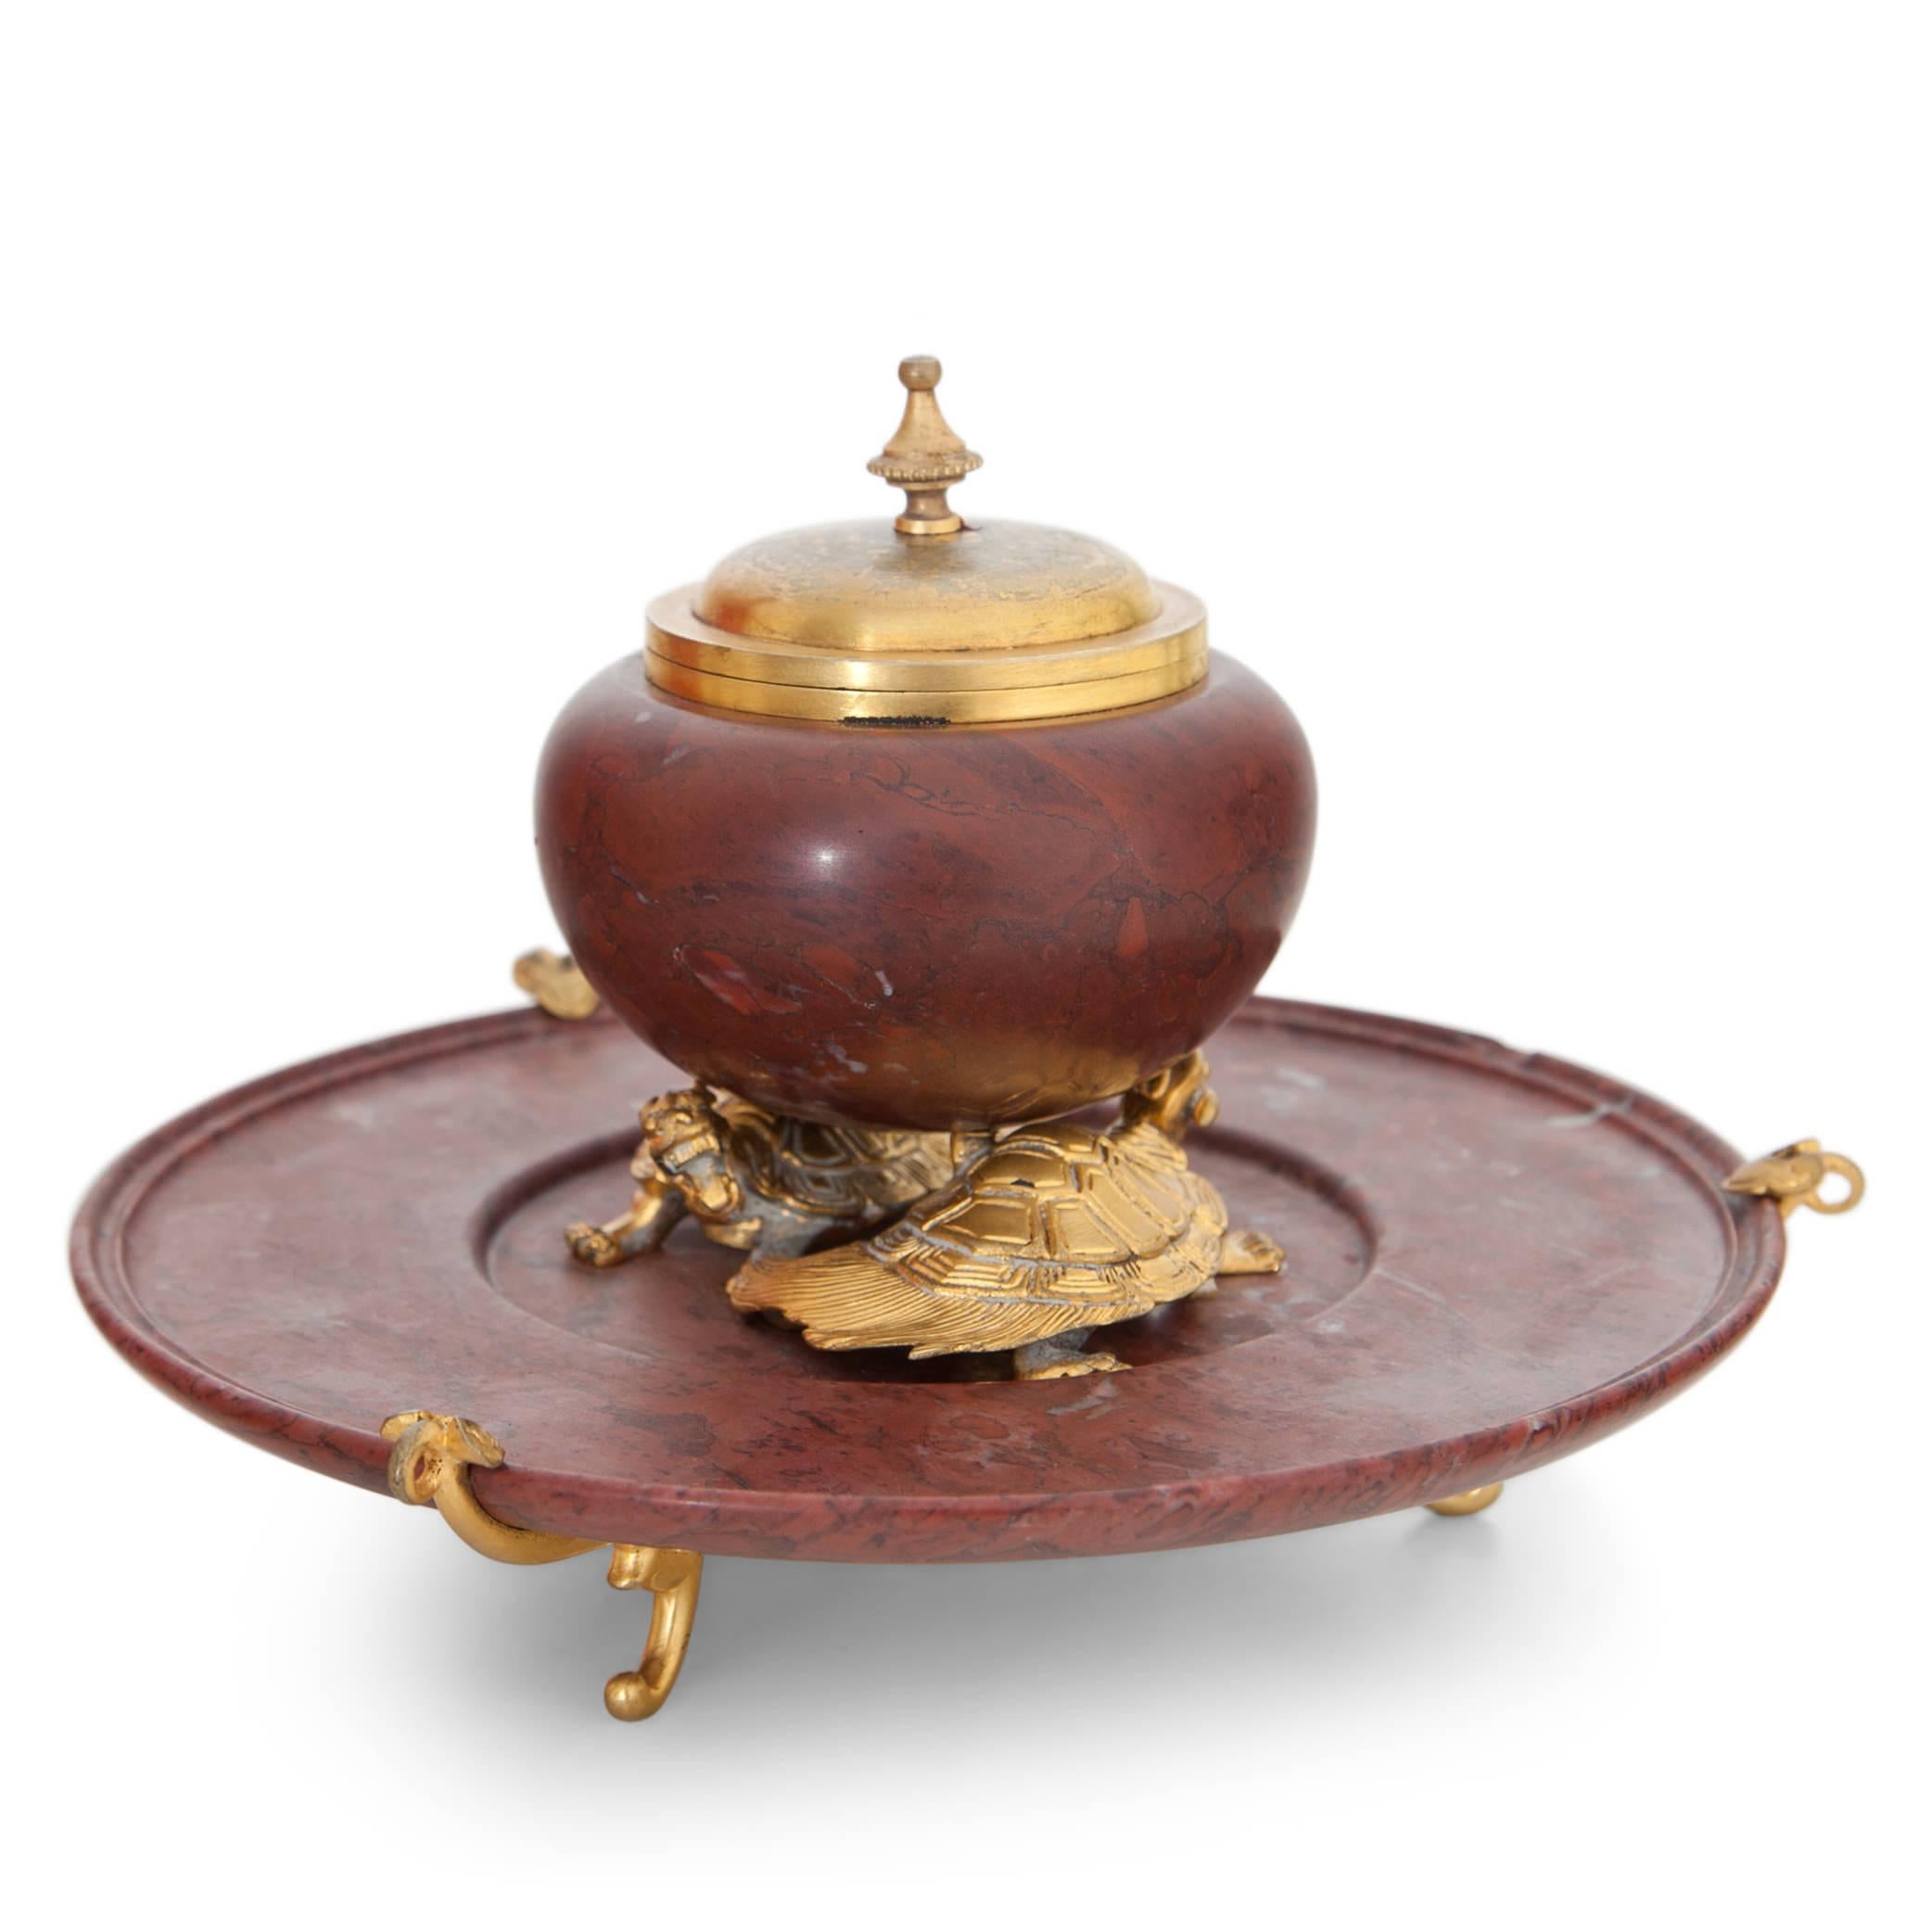 Inkwell out of red marble and gilt bronze by F. Barbedienne. The inkwell with a hinged lid stands on two bronze turtles and rests upon a three-legged marble plate. Maesures: Diameter inkwell barrel Ø 8 cm.